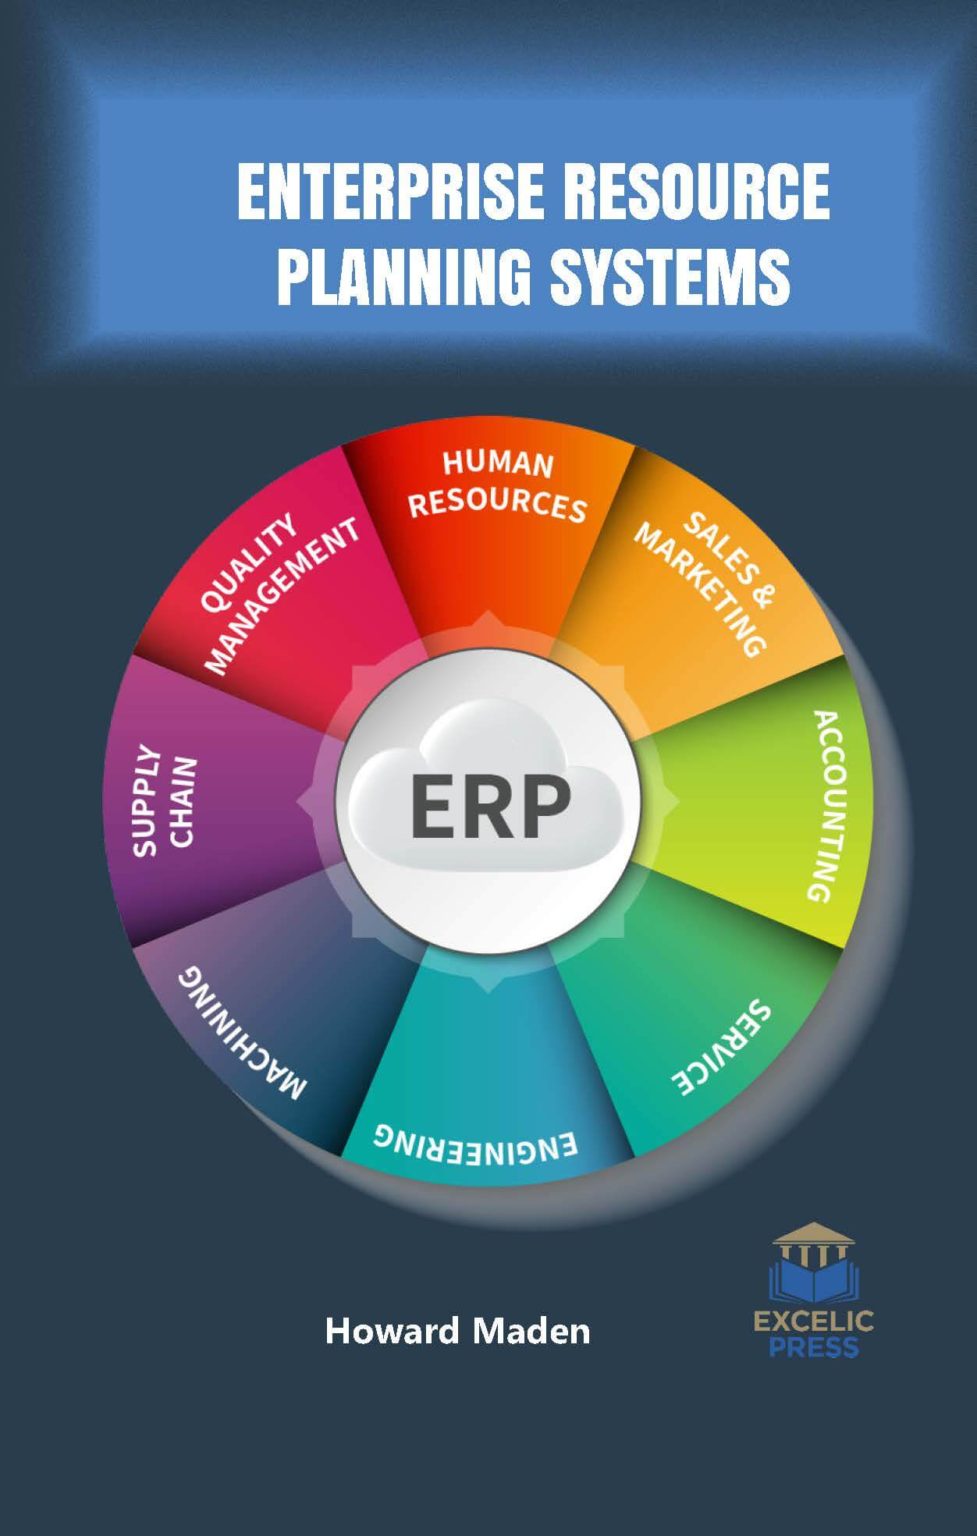 components of enterprise resource planning system